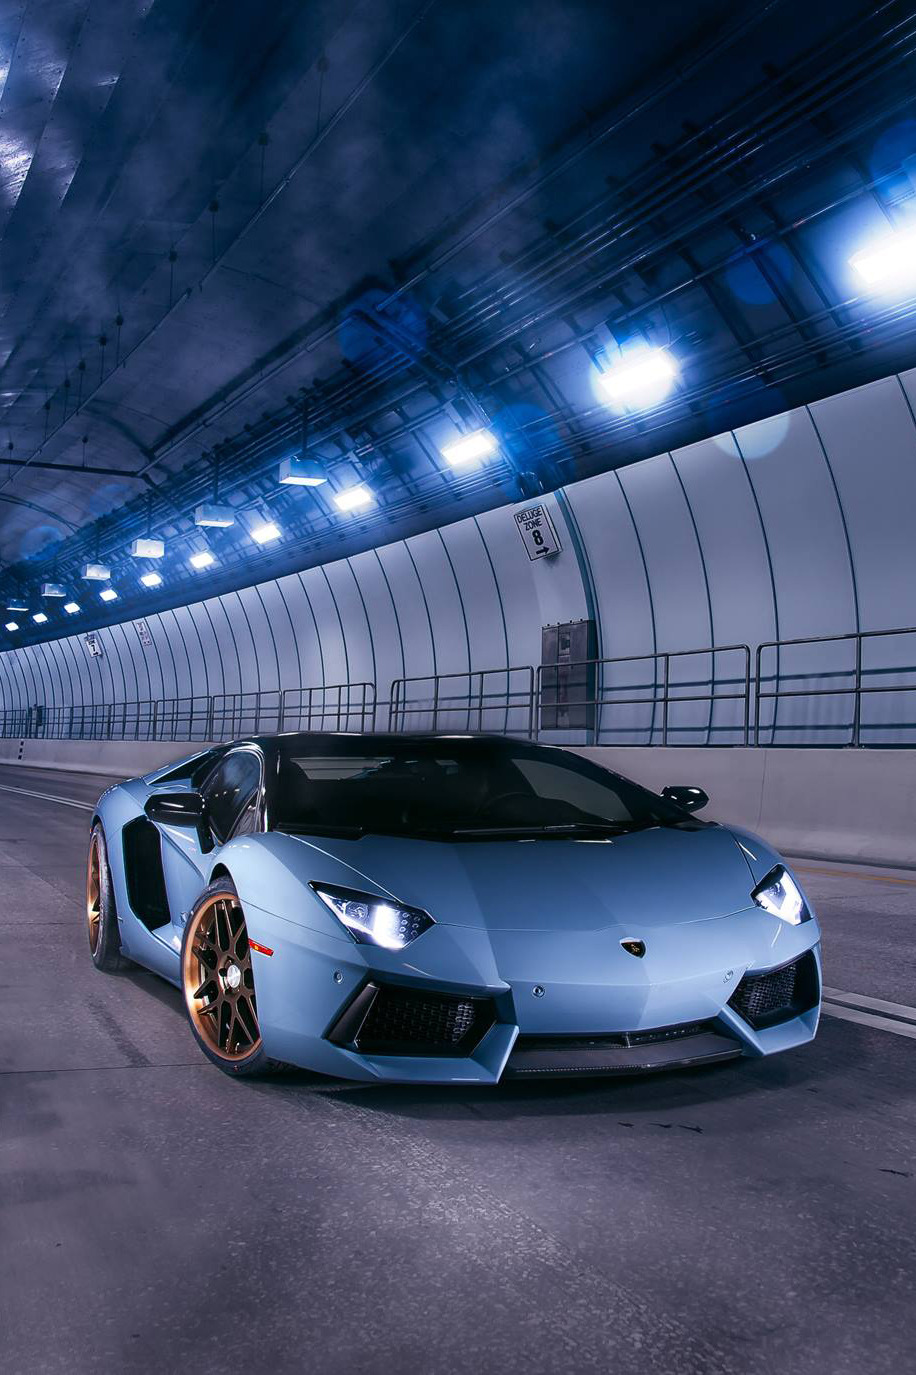 airemoderne:  Aventador at Miami Tunnel by Jonathan Camere 